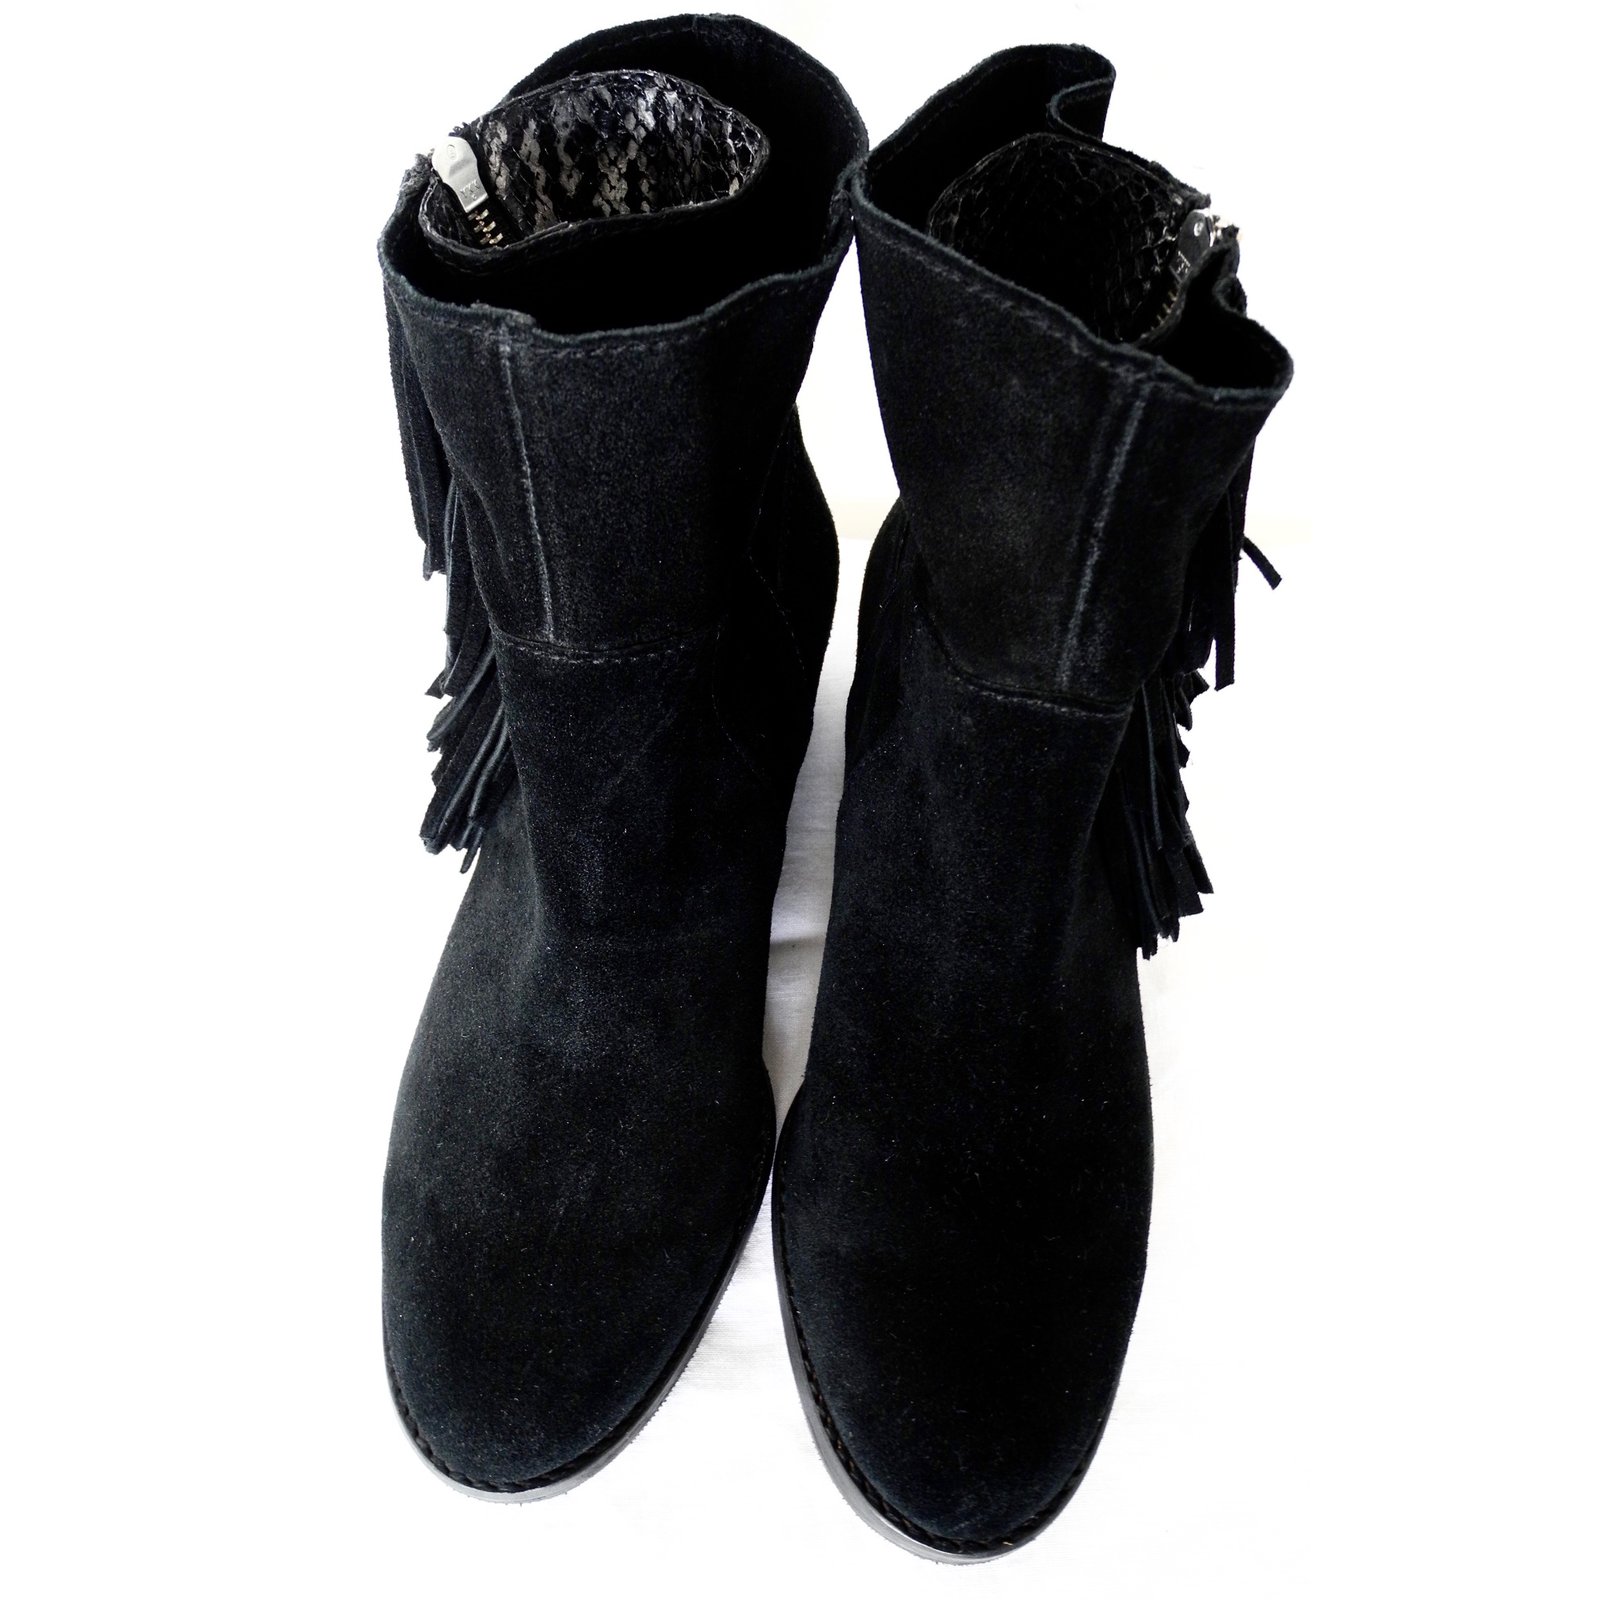 zadig and voltaire fringe boots